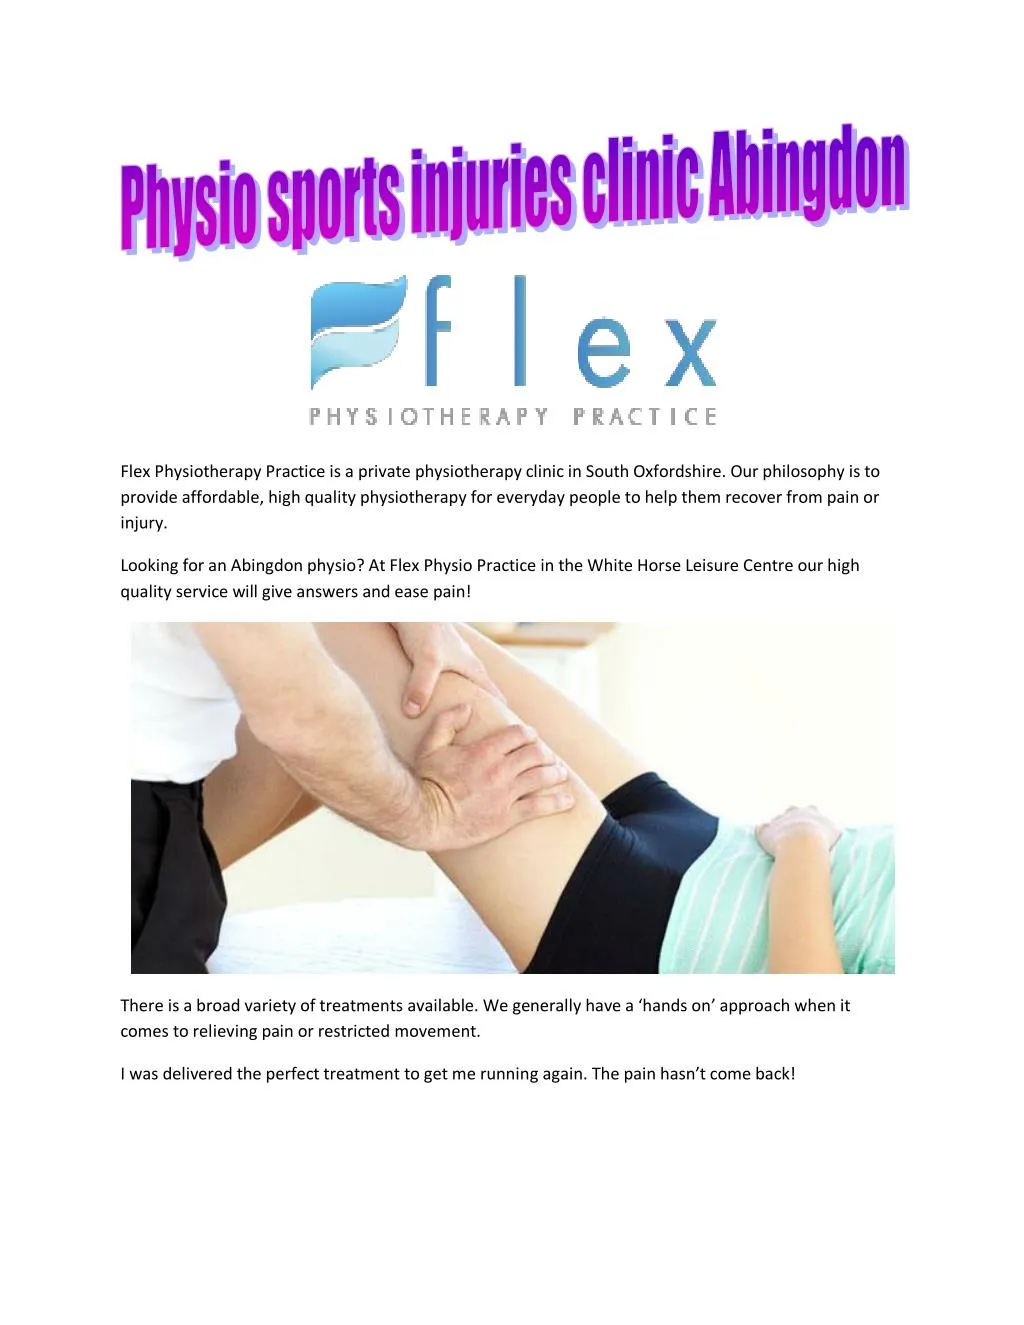 flex physiotherapy practice is a private